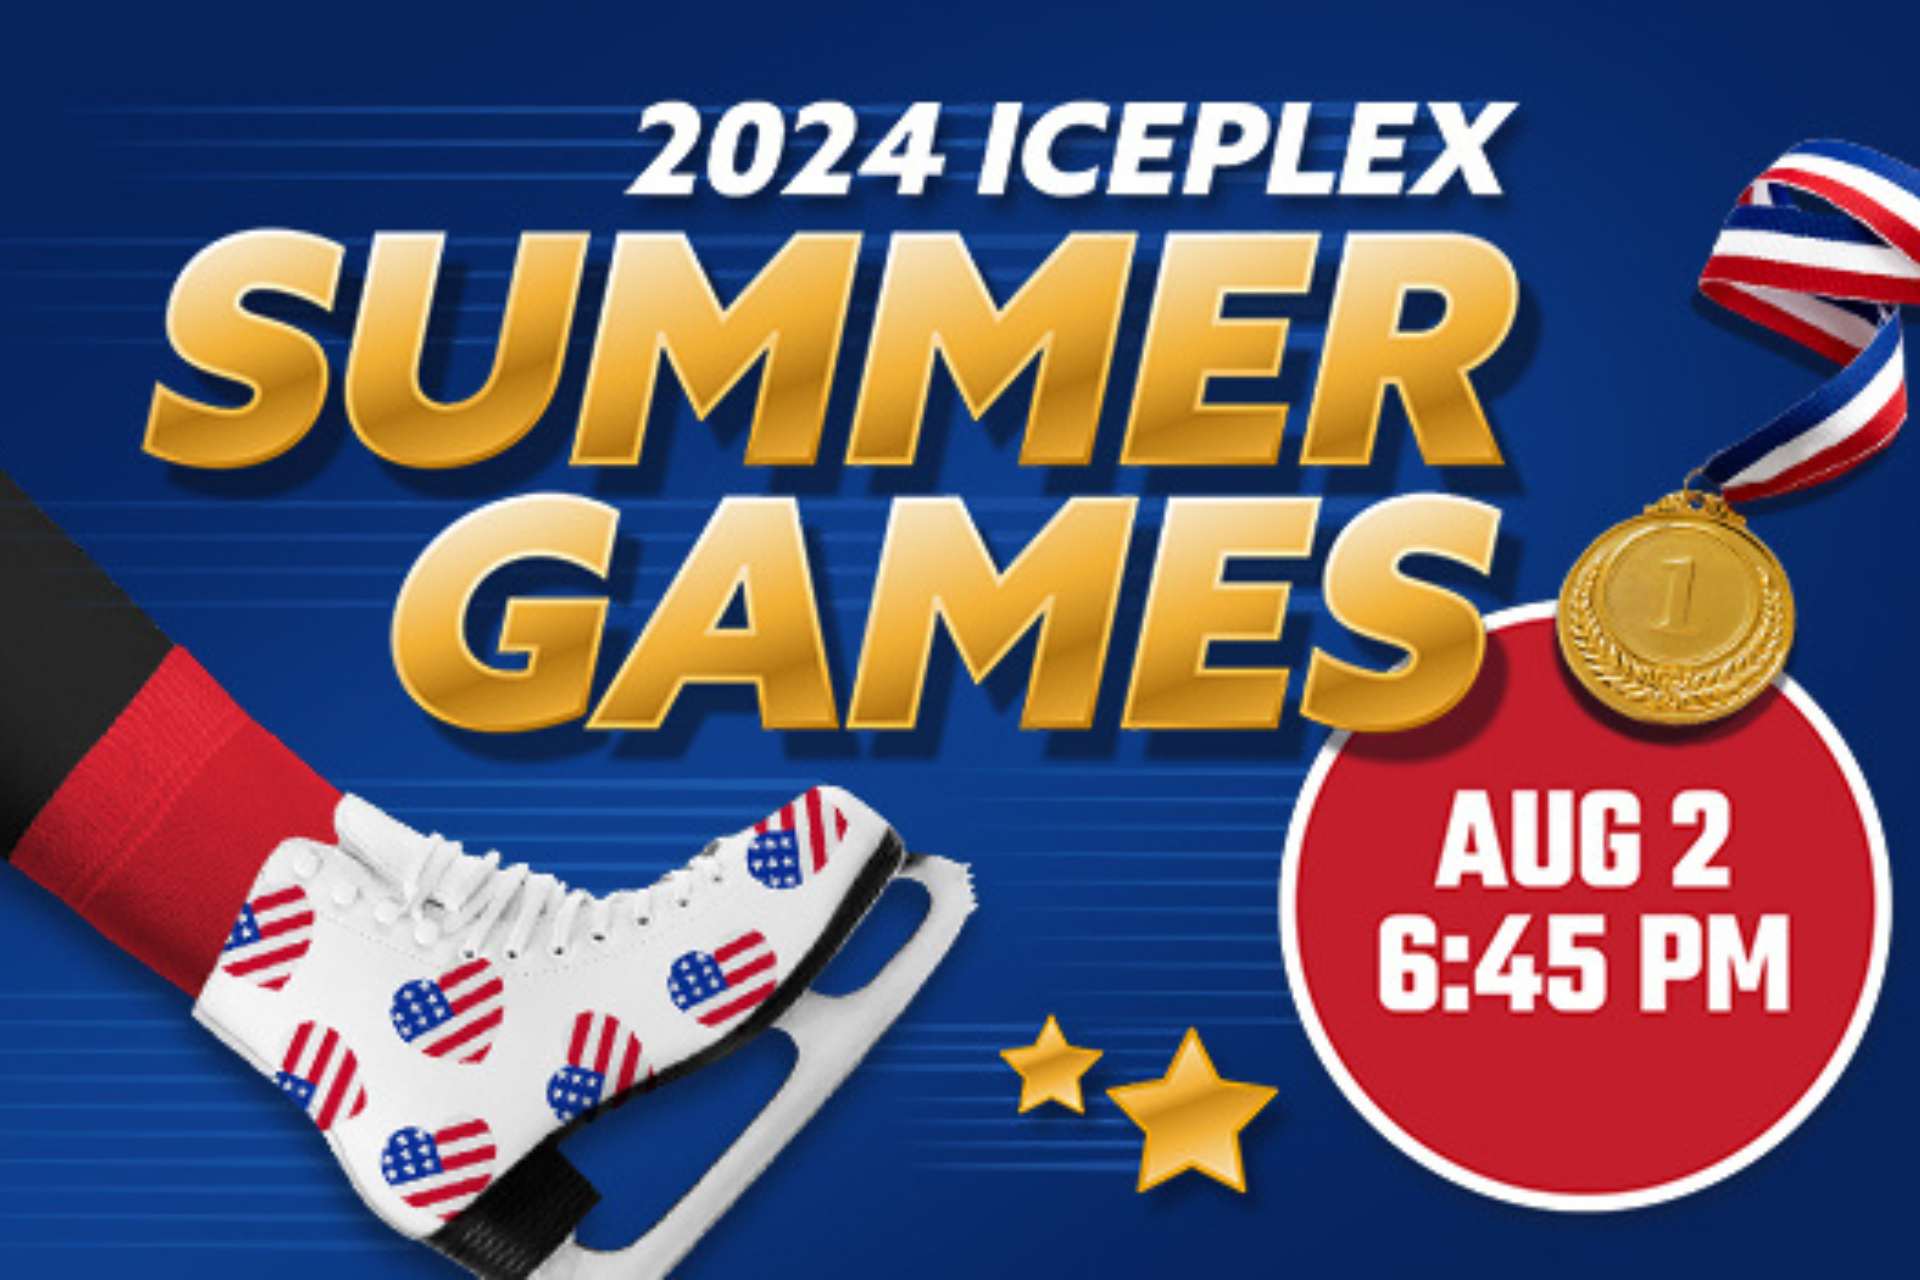 Join our Iceplex Summer Games Public Skate August 2 at 6:45pm